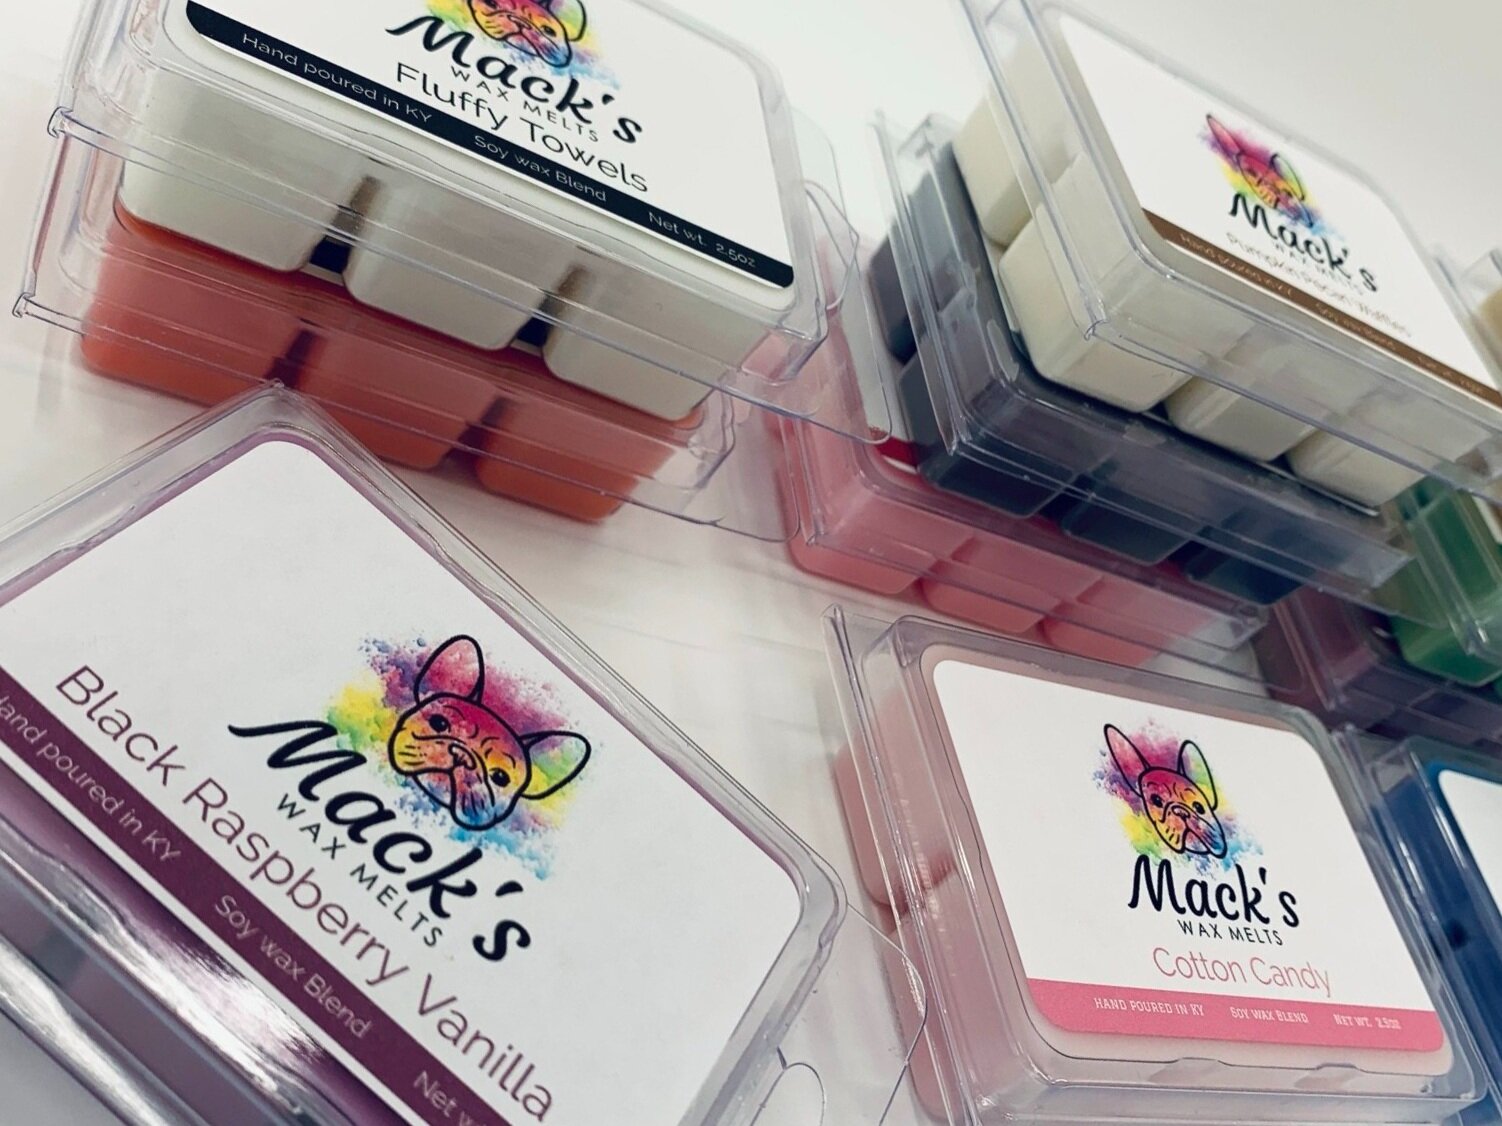 Mack's Wax Melts — About Us